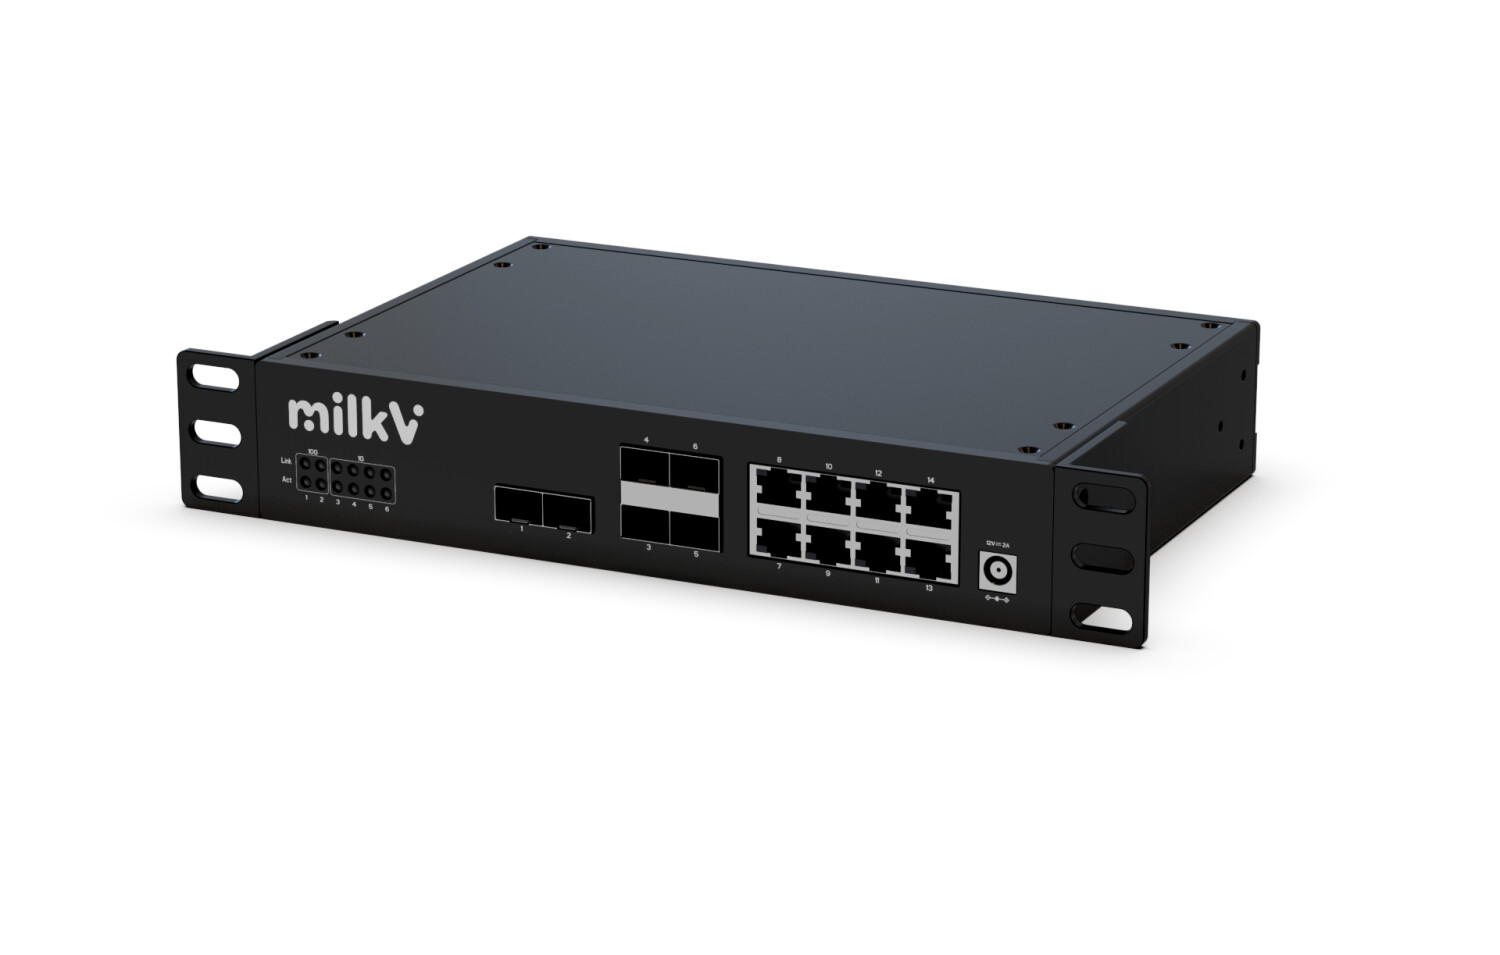 10 Port Managed Gigabit Ethernet Switch - Ethernet Switches, Networking IO  Products